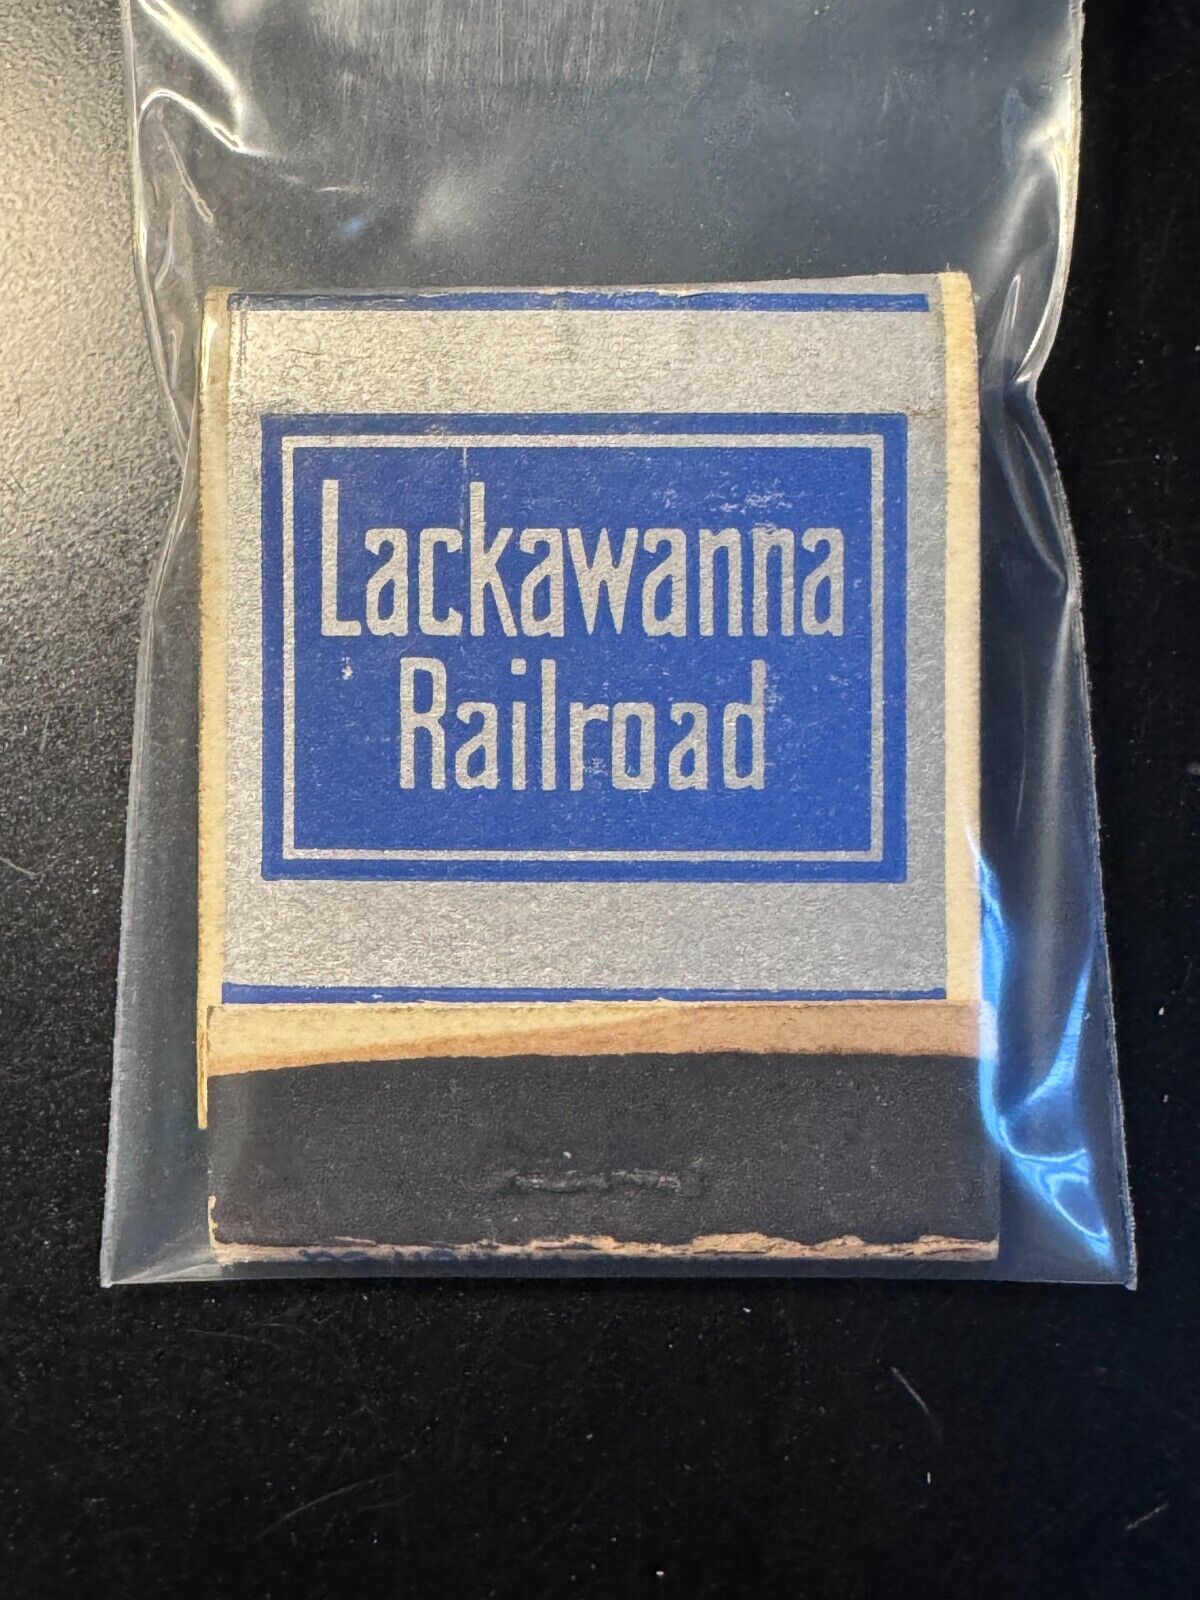 MATCHBOOK - LACKAWANNA RAILROAD - THE GREAT LAKES AND THE SEA - UNSTRUCK